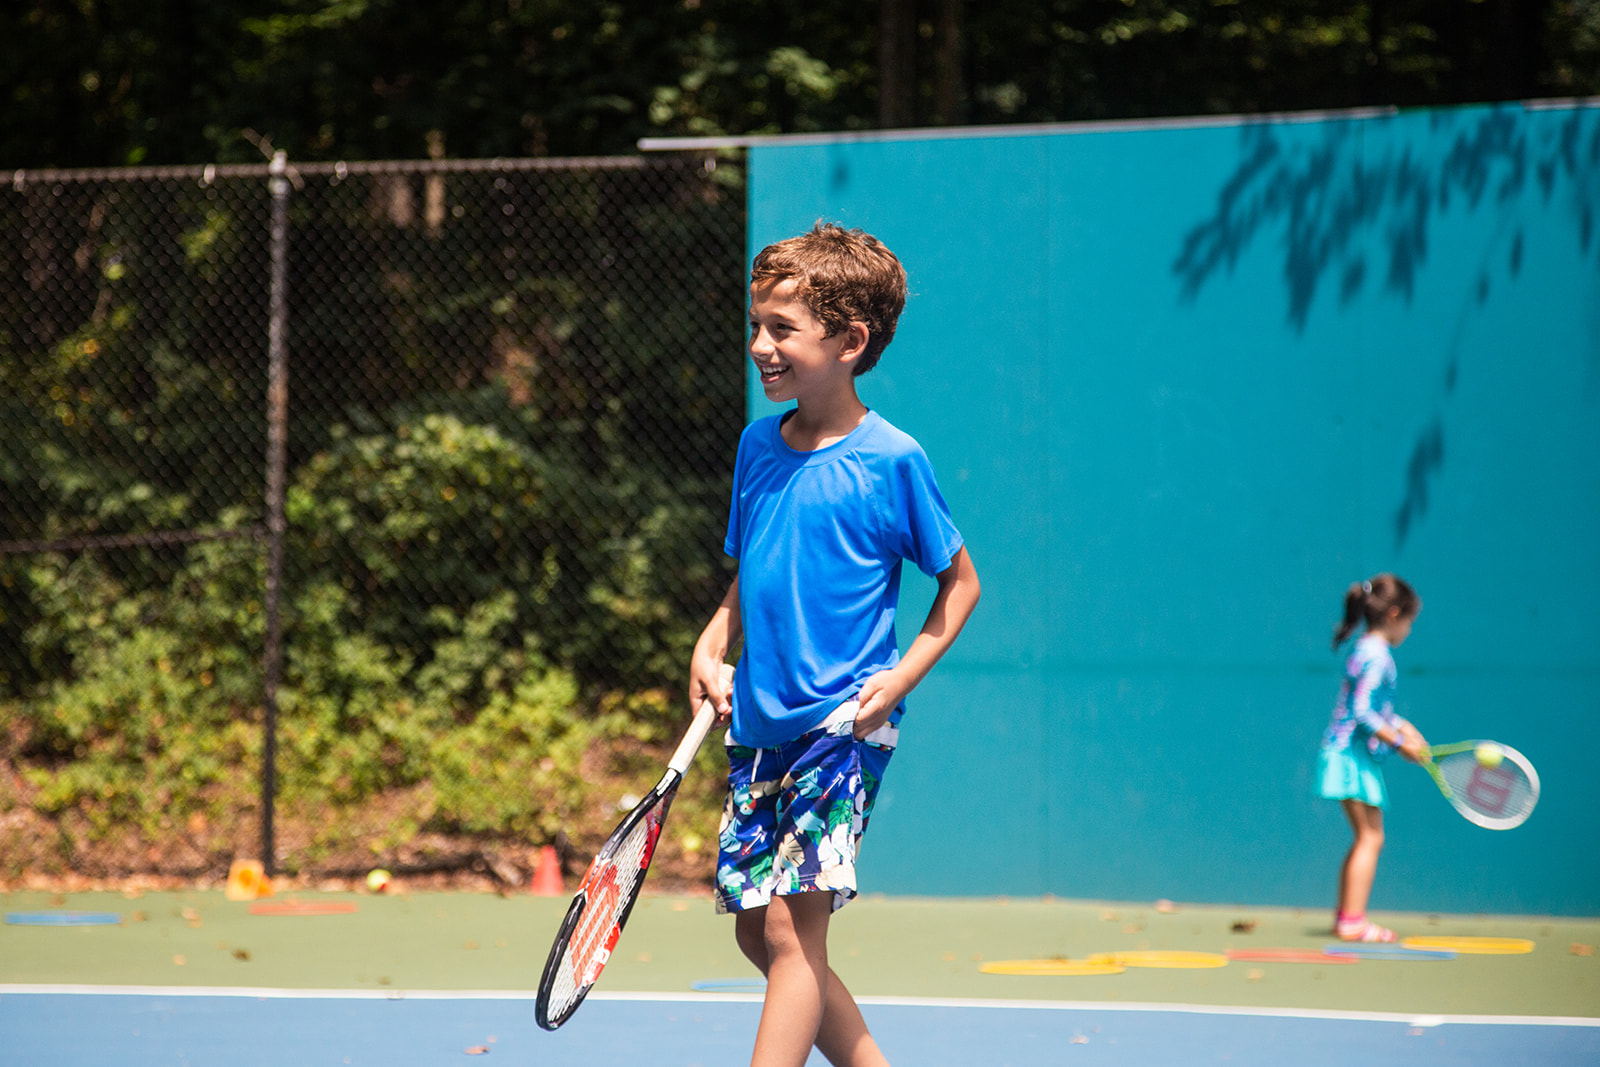 Photo of a boy in a blue shirt holding a tennis racket, taking youth tennis program at Old Georgetown Tennis Club